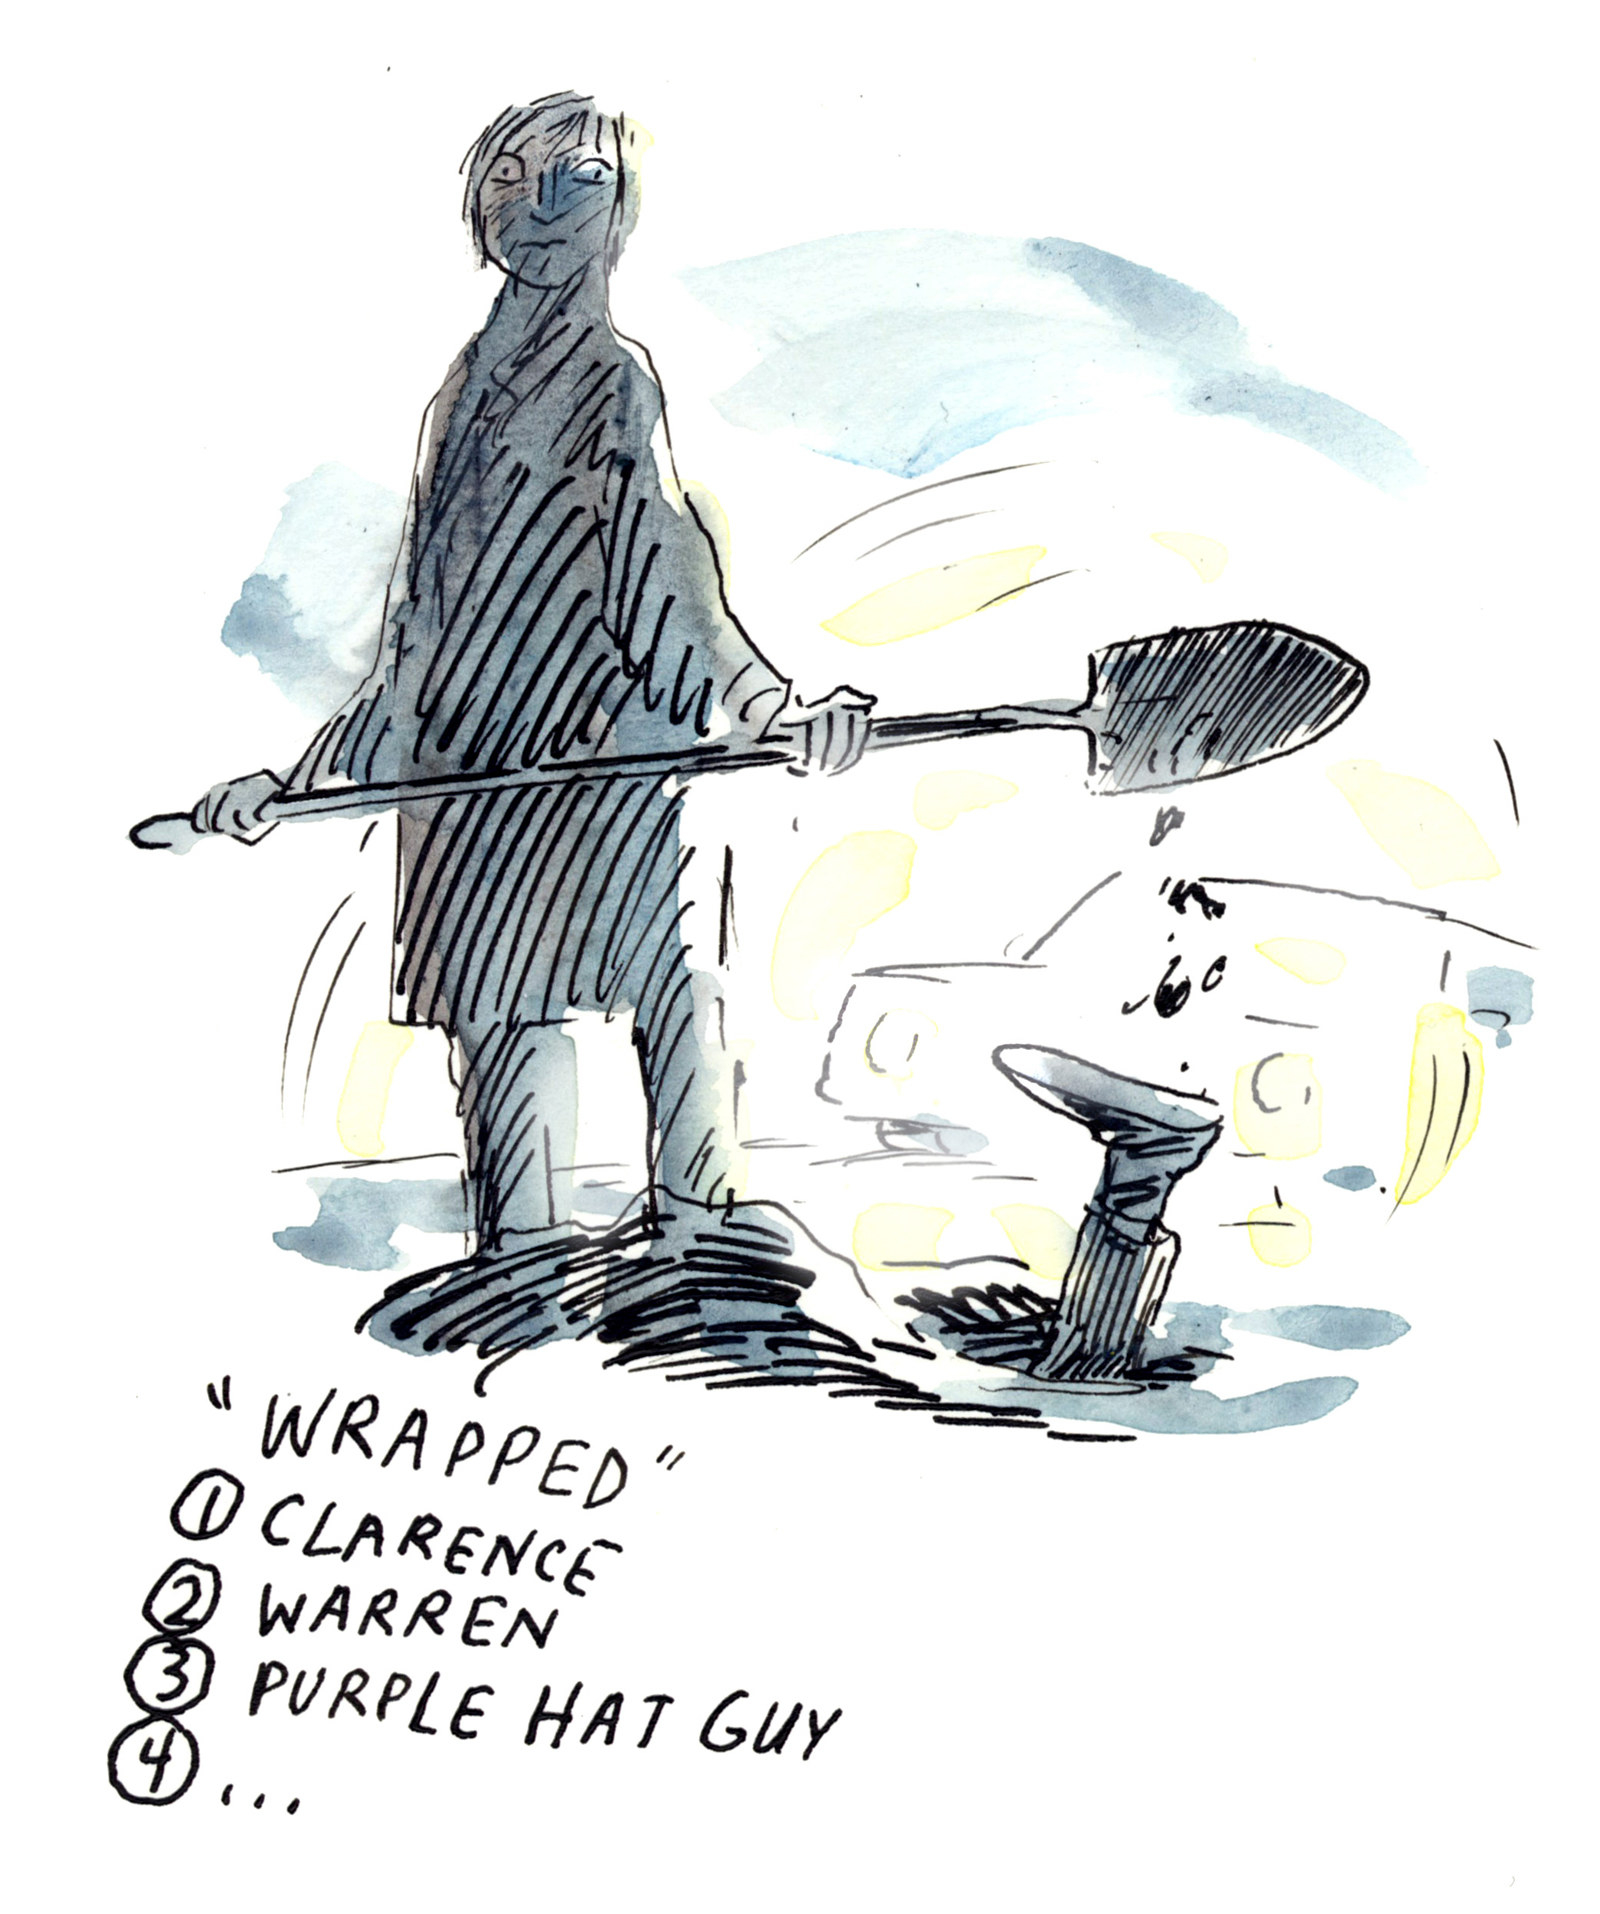 an image of a man with a shovel and a foot sticking out of the ground that reads &quot;wrapped: 1) Clarence, 2) Warren, 3) Purple hat guy, 4) ...&quot;